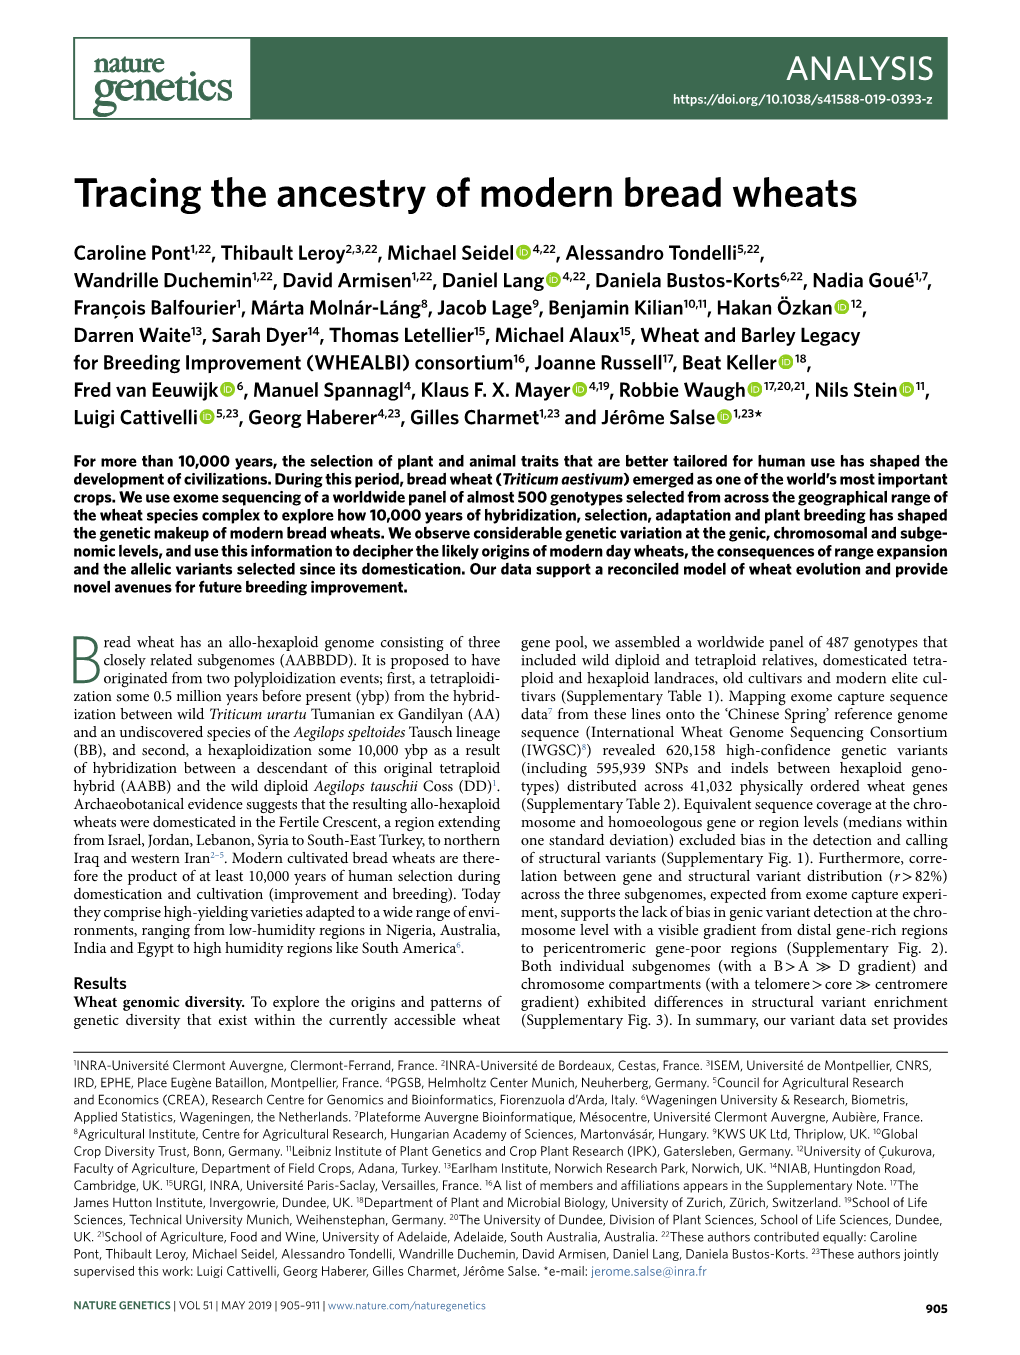 Tracing the Ancestry of Modern Bread Wheats